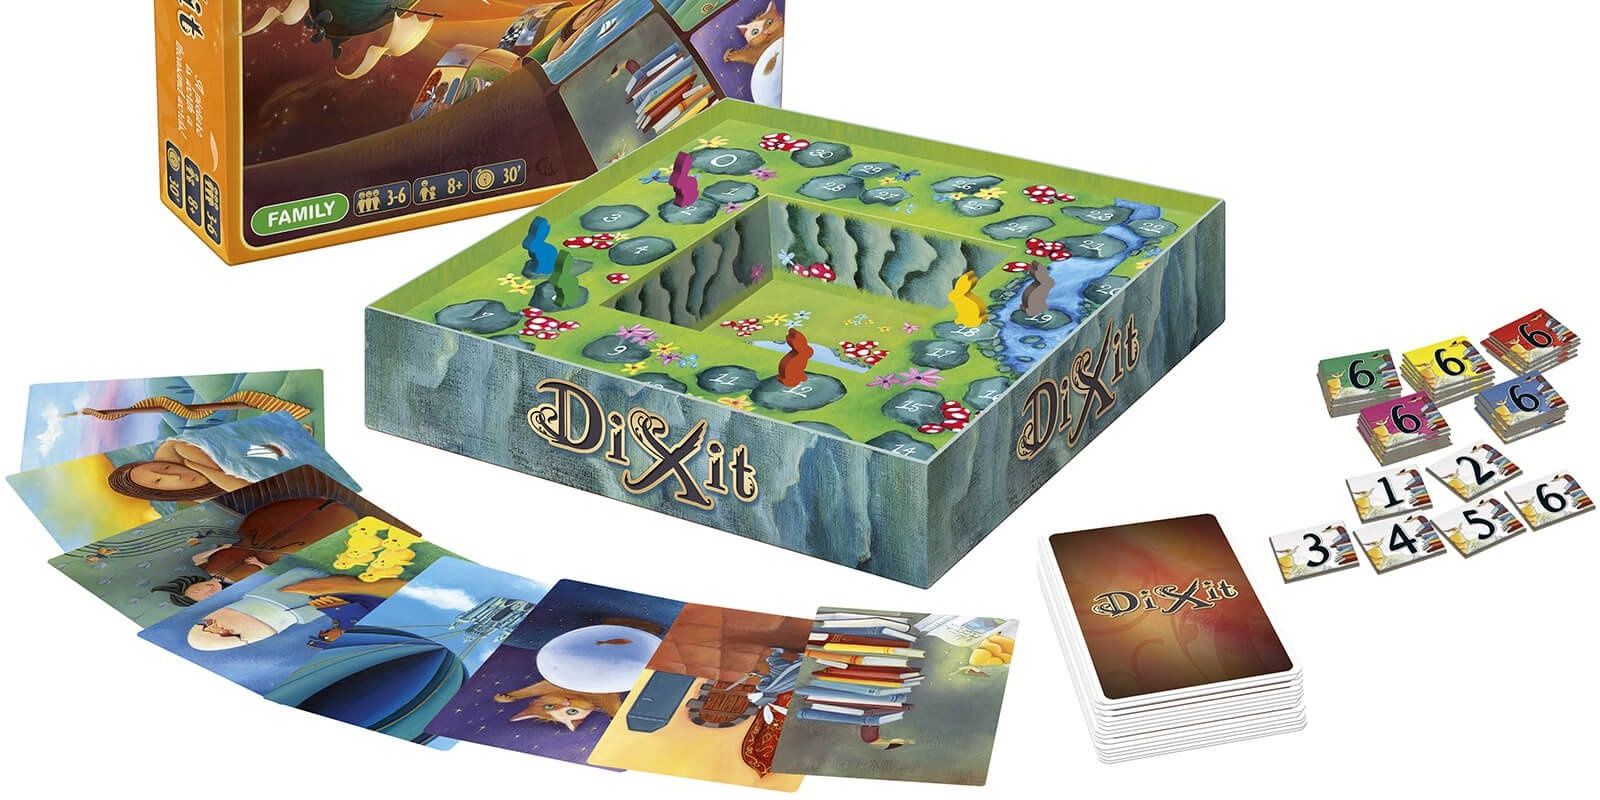 Dixit Board Game Setup and Ready To Play